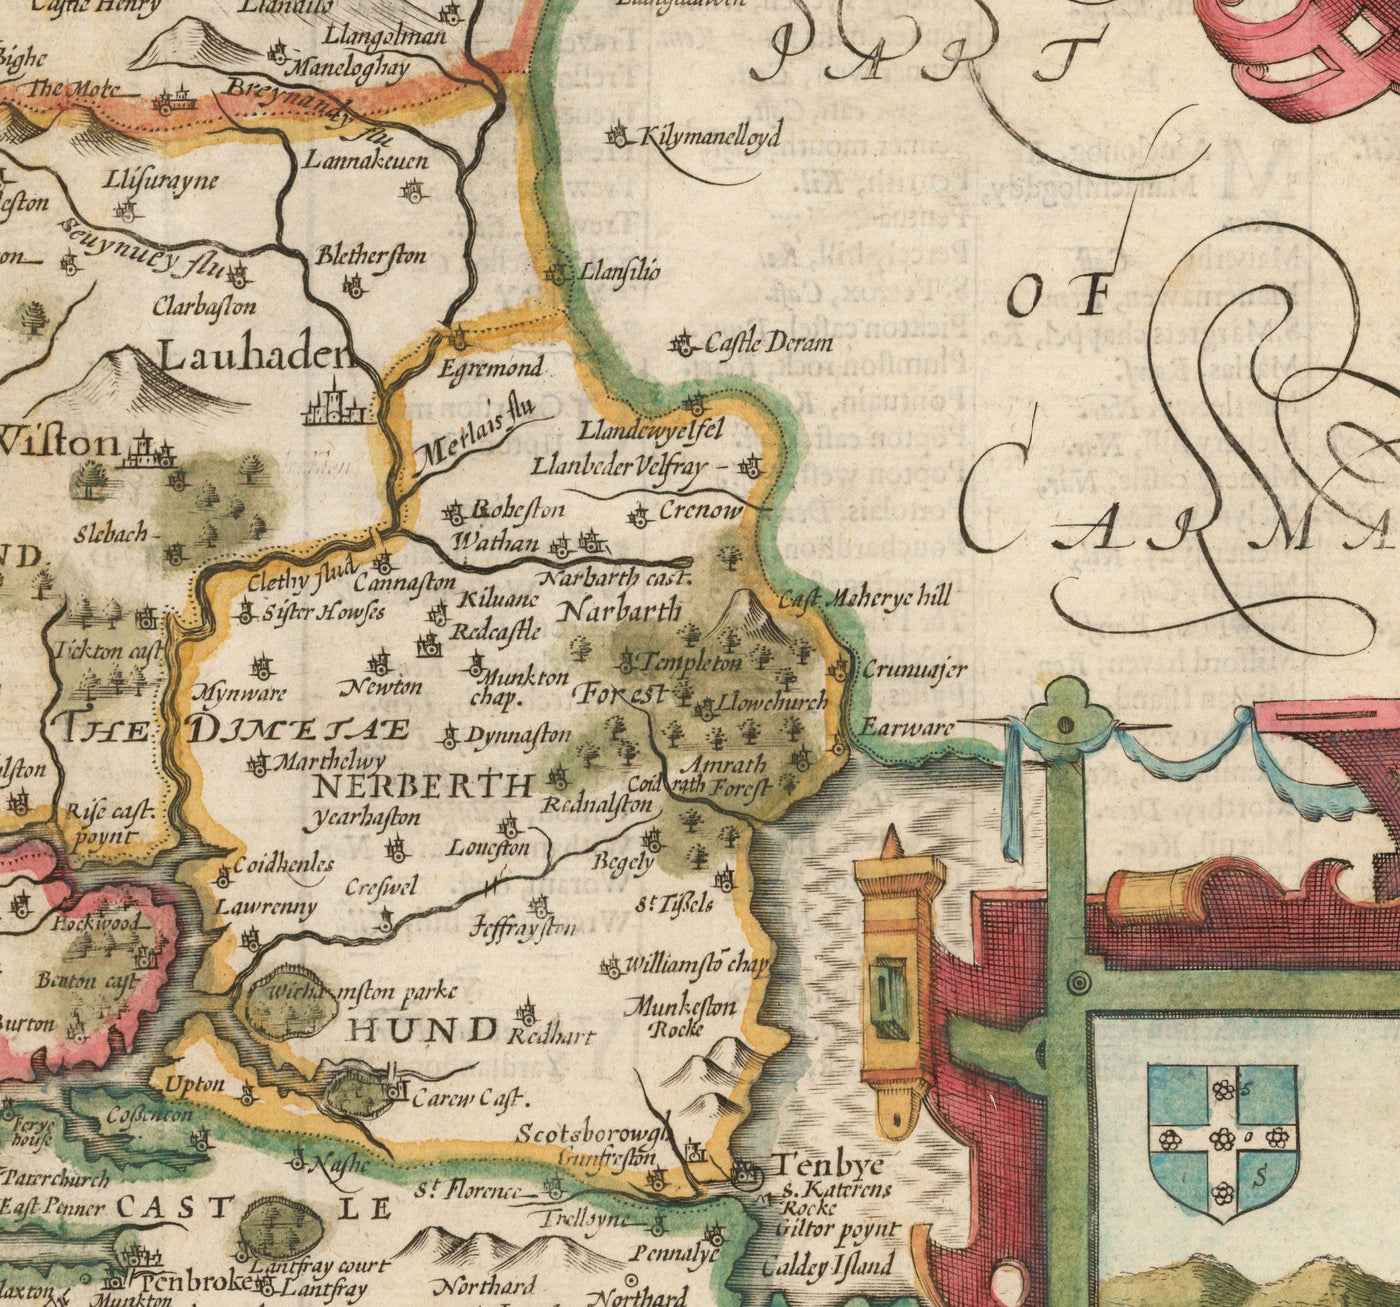 Old Map of Pembrokeshire Wales 1611 John Speed - Haverfordwest, St Davids, Fishguard